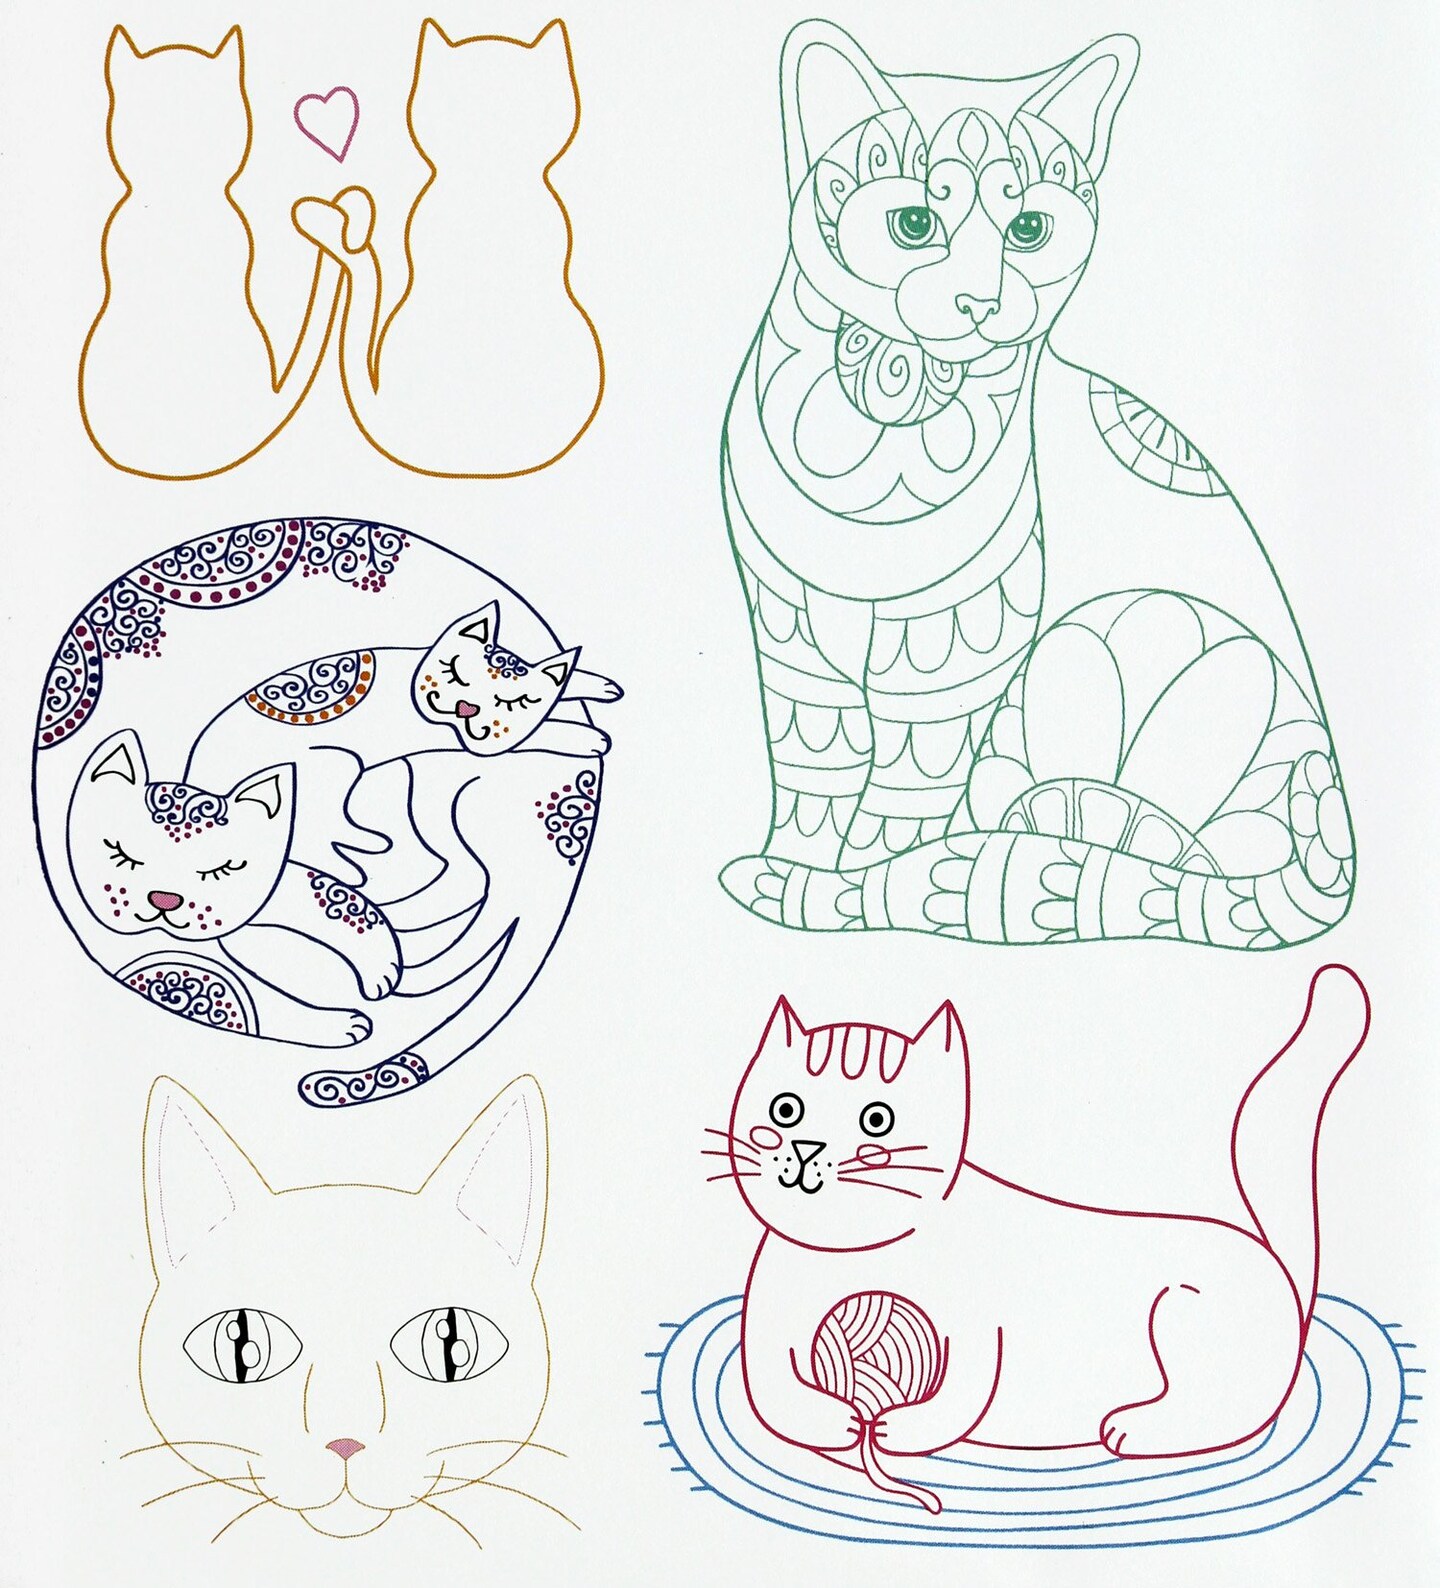 Leisure Arts Iron-On Transfer, Cat, Embroidery Patterns, Embroidery Patterns Iron on Transfers, Hand Embroidery Patterns, Iron on Embroidery Patterns, Embroidery Transfer Patterns